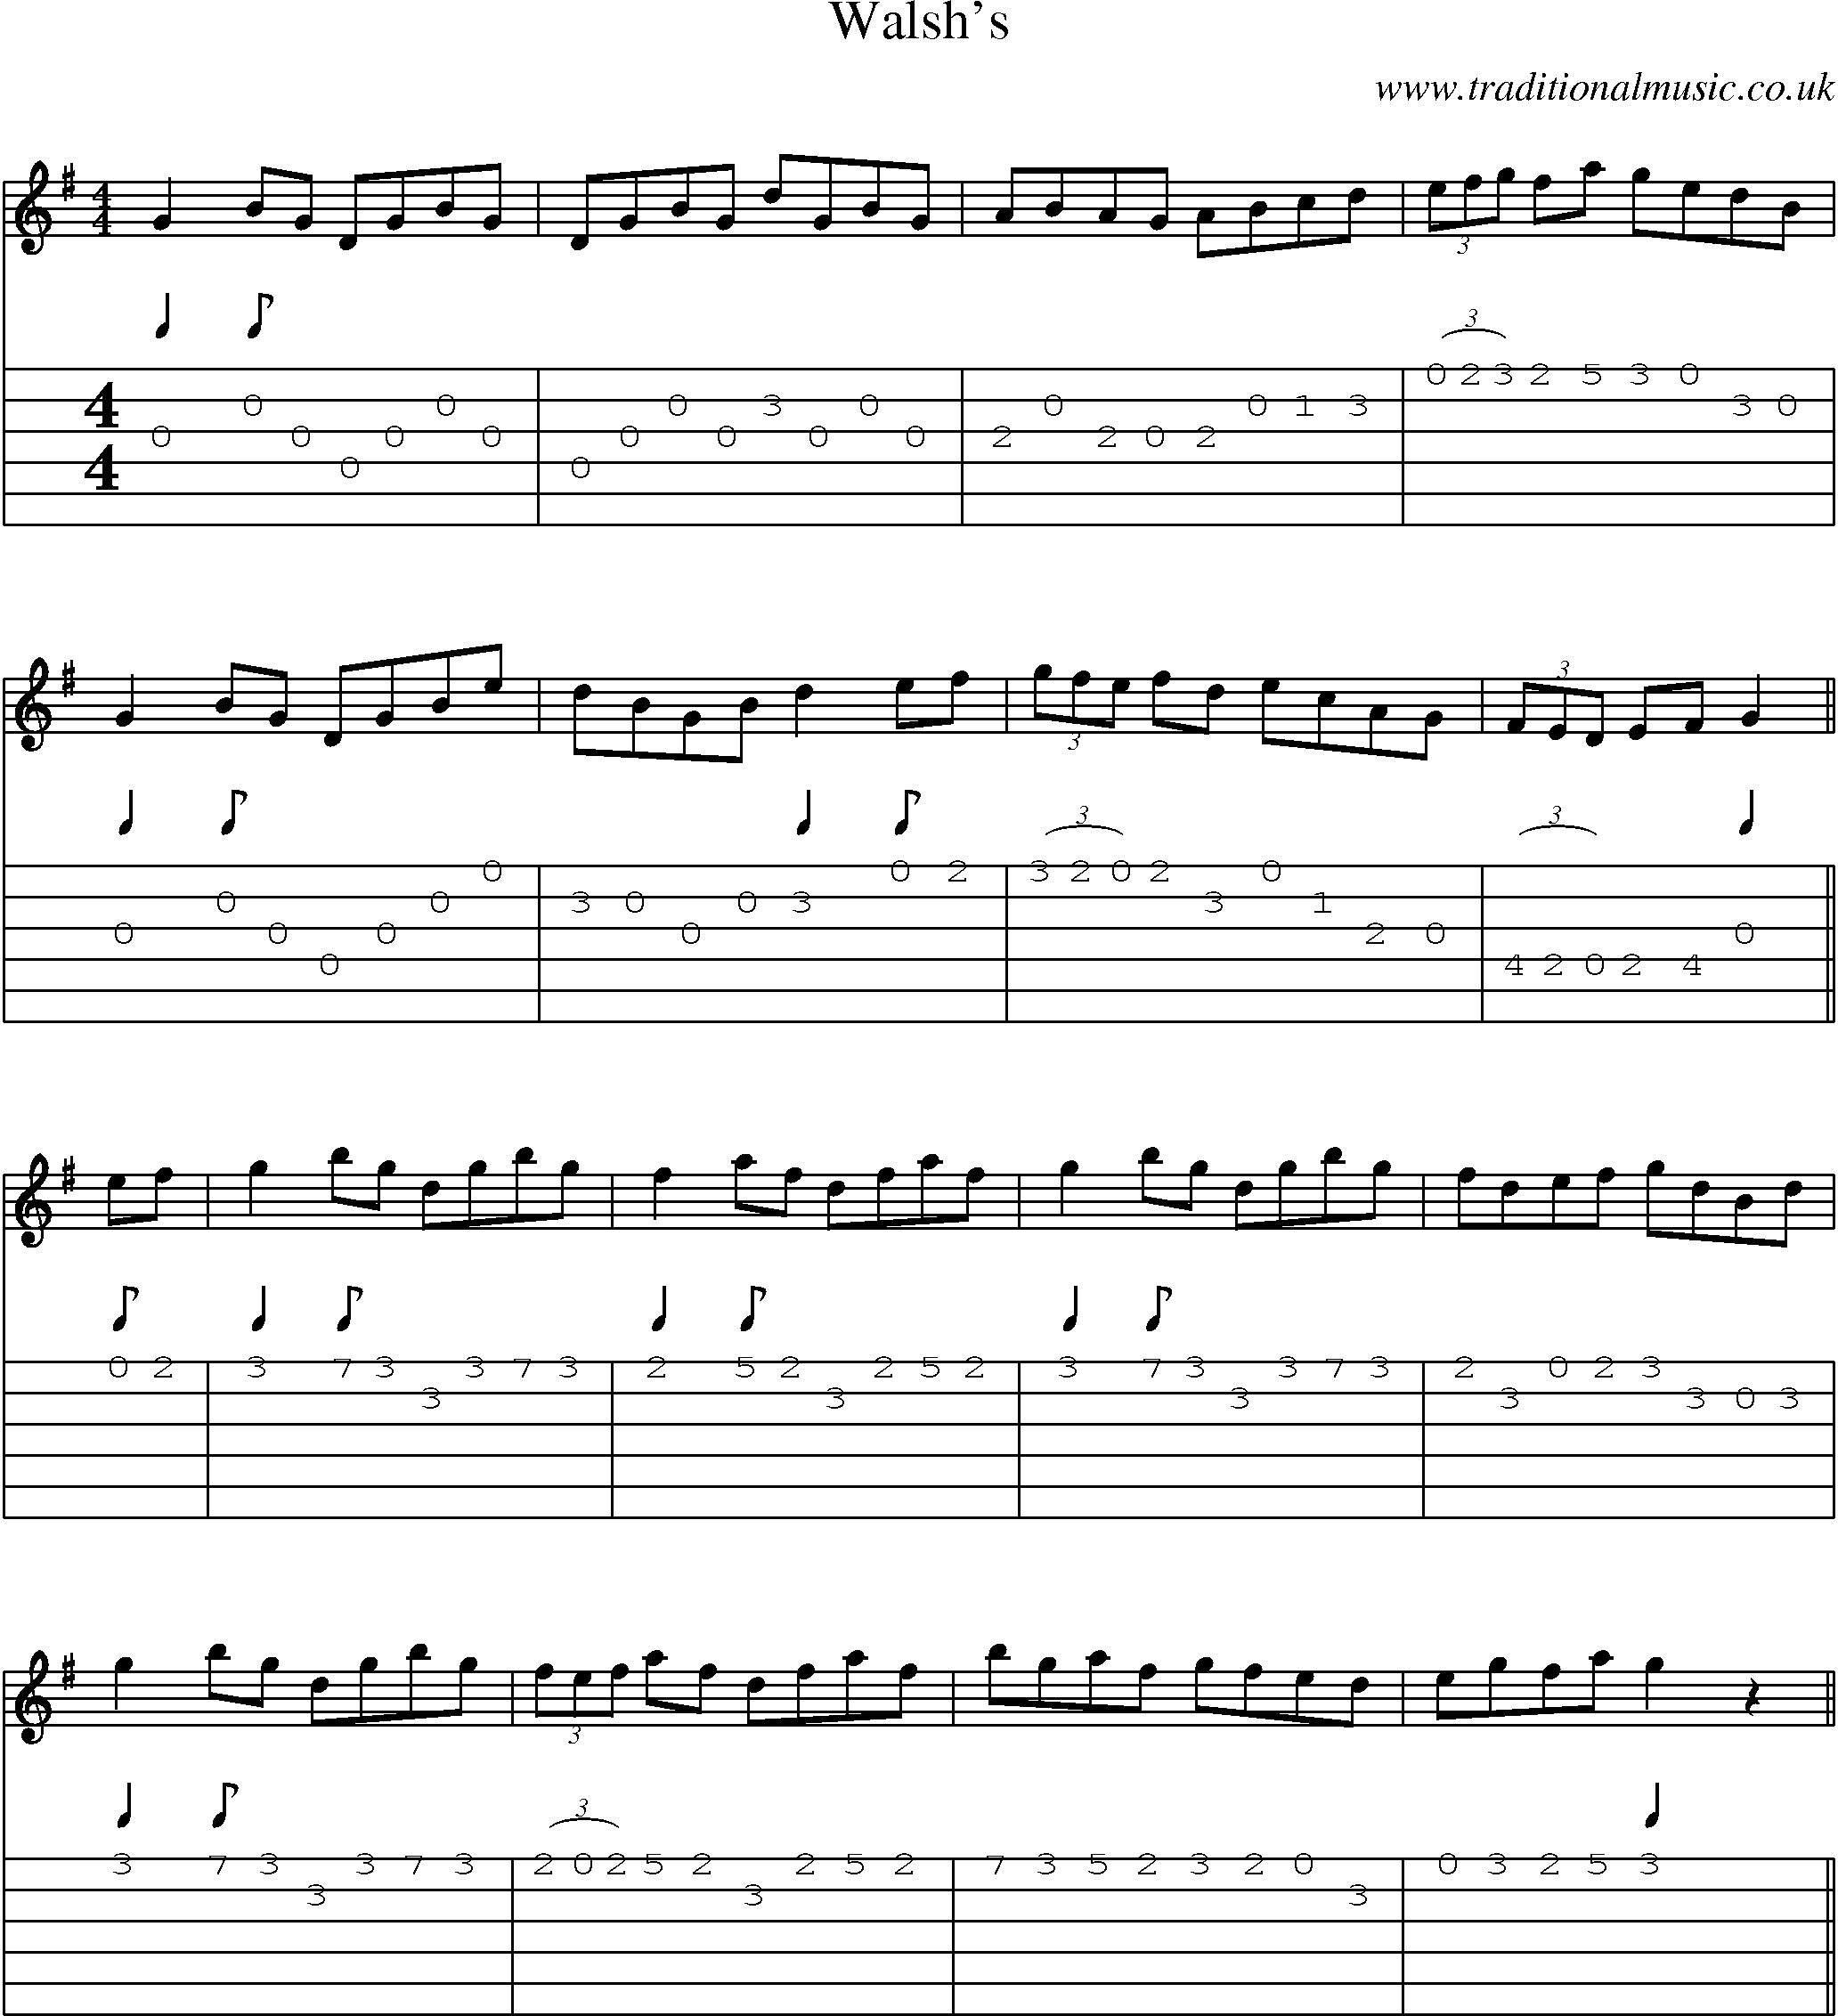 Music Score and Guitar Tabs for Walshs